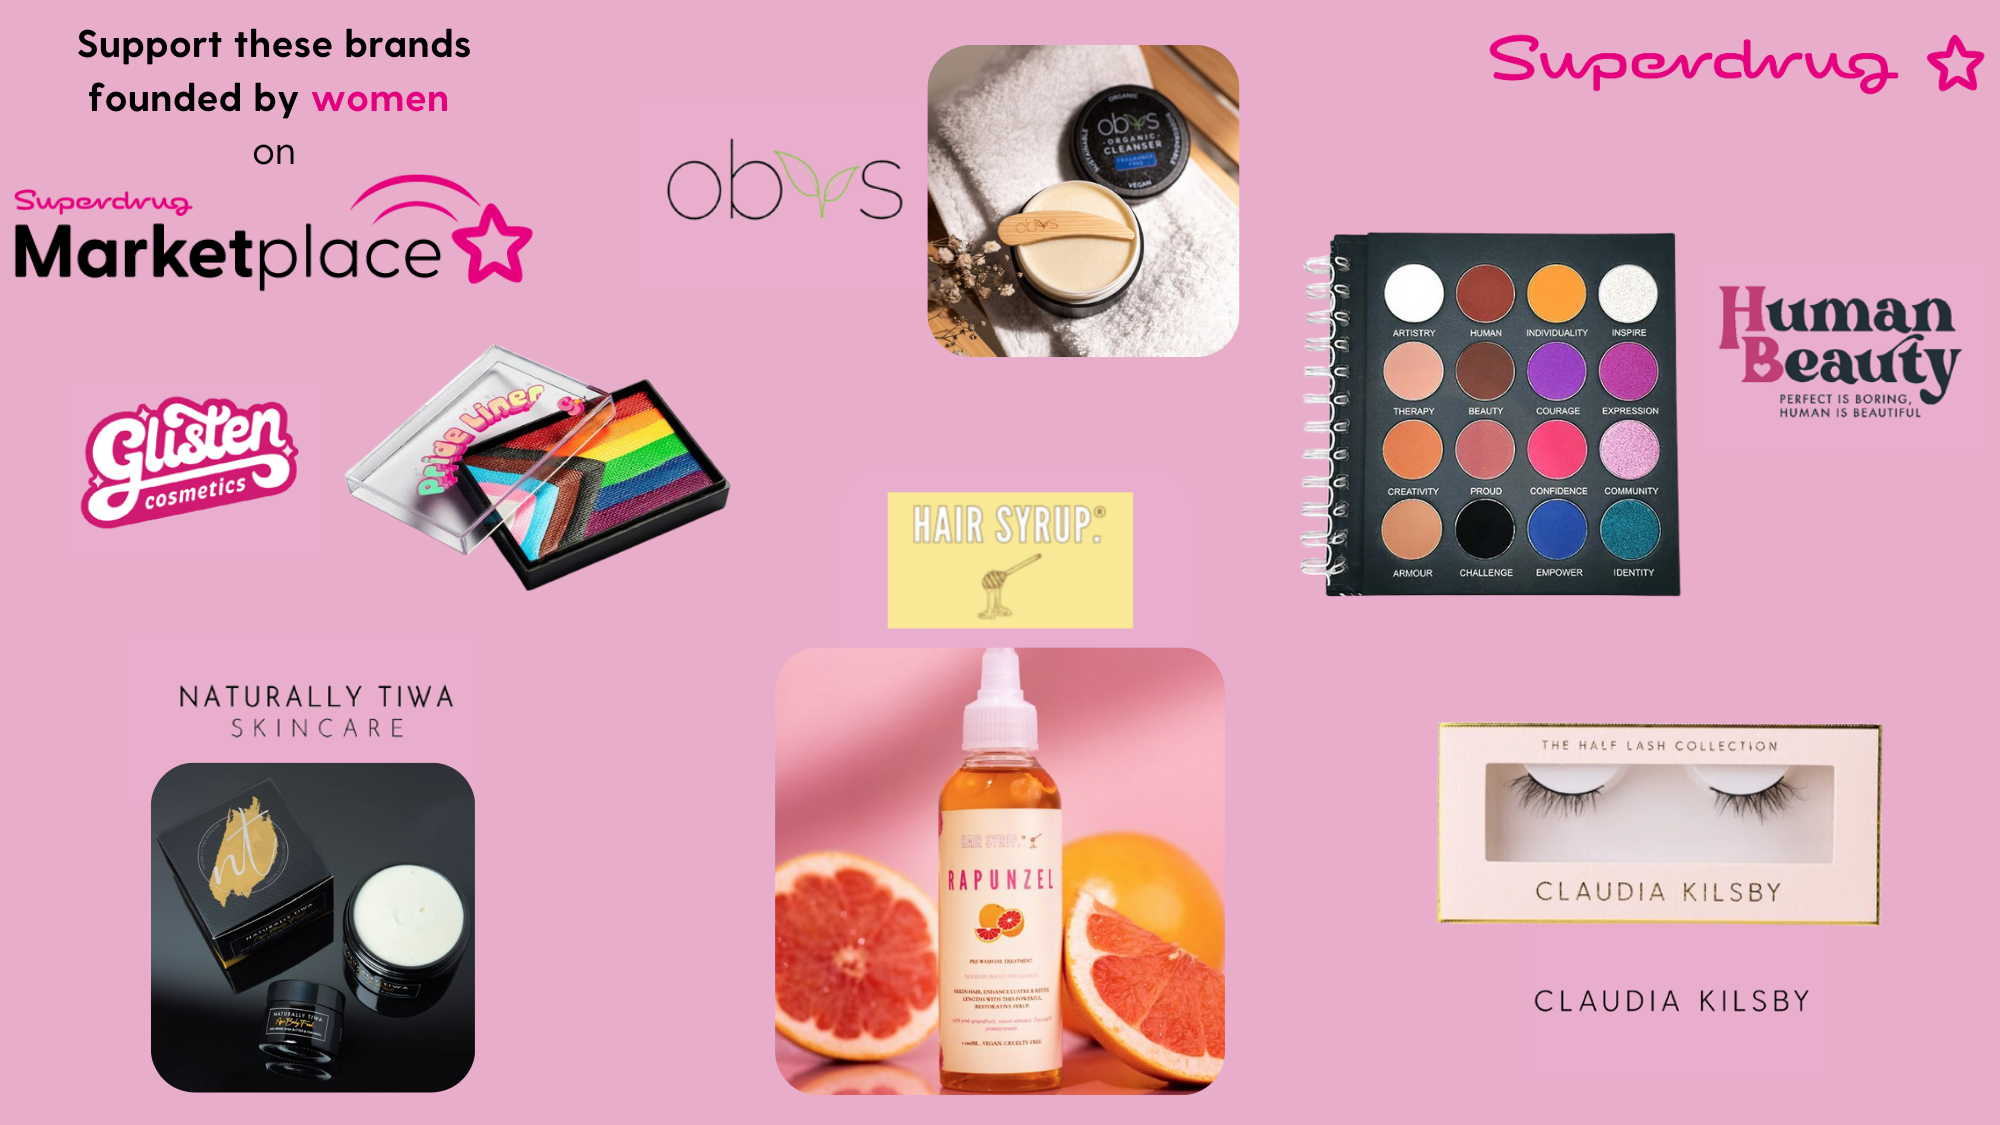 Superdrug_support these brands founded by women